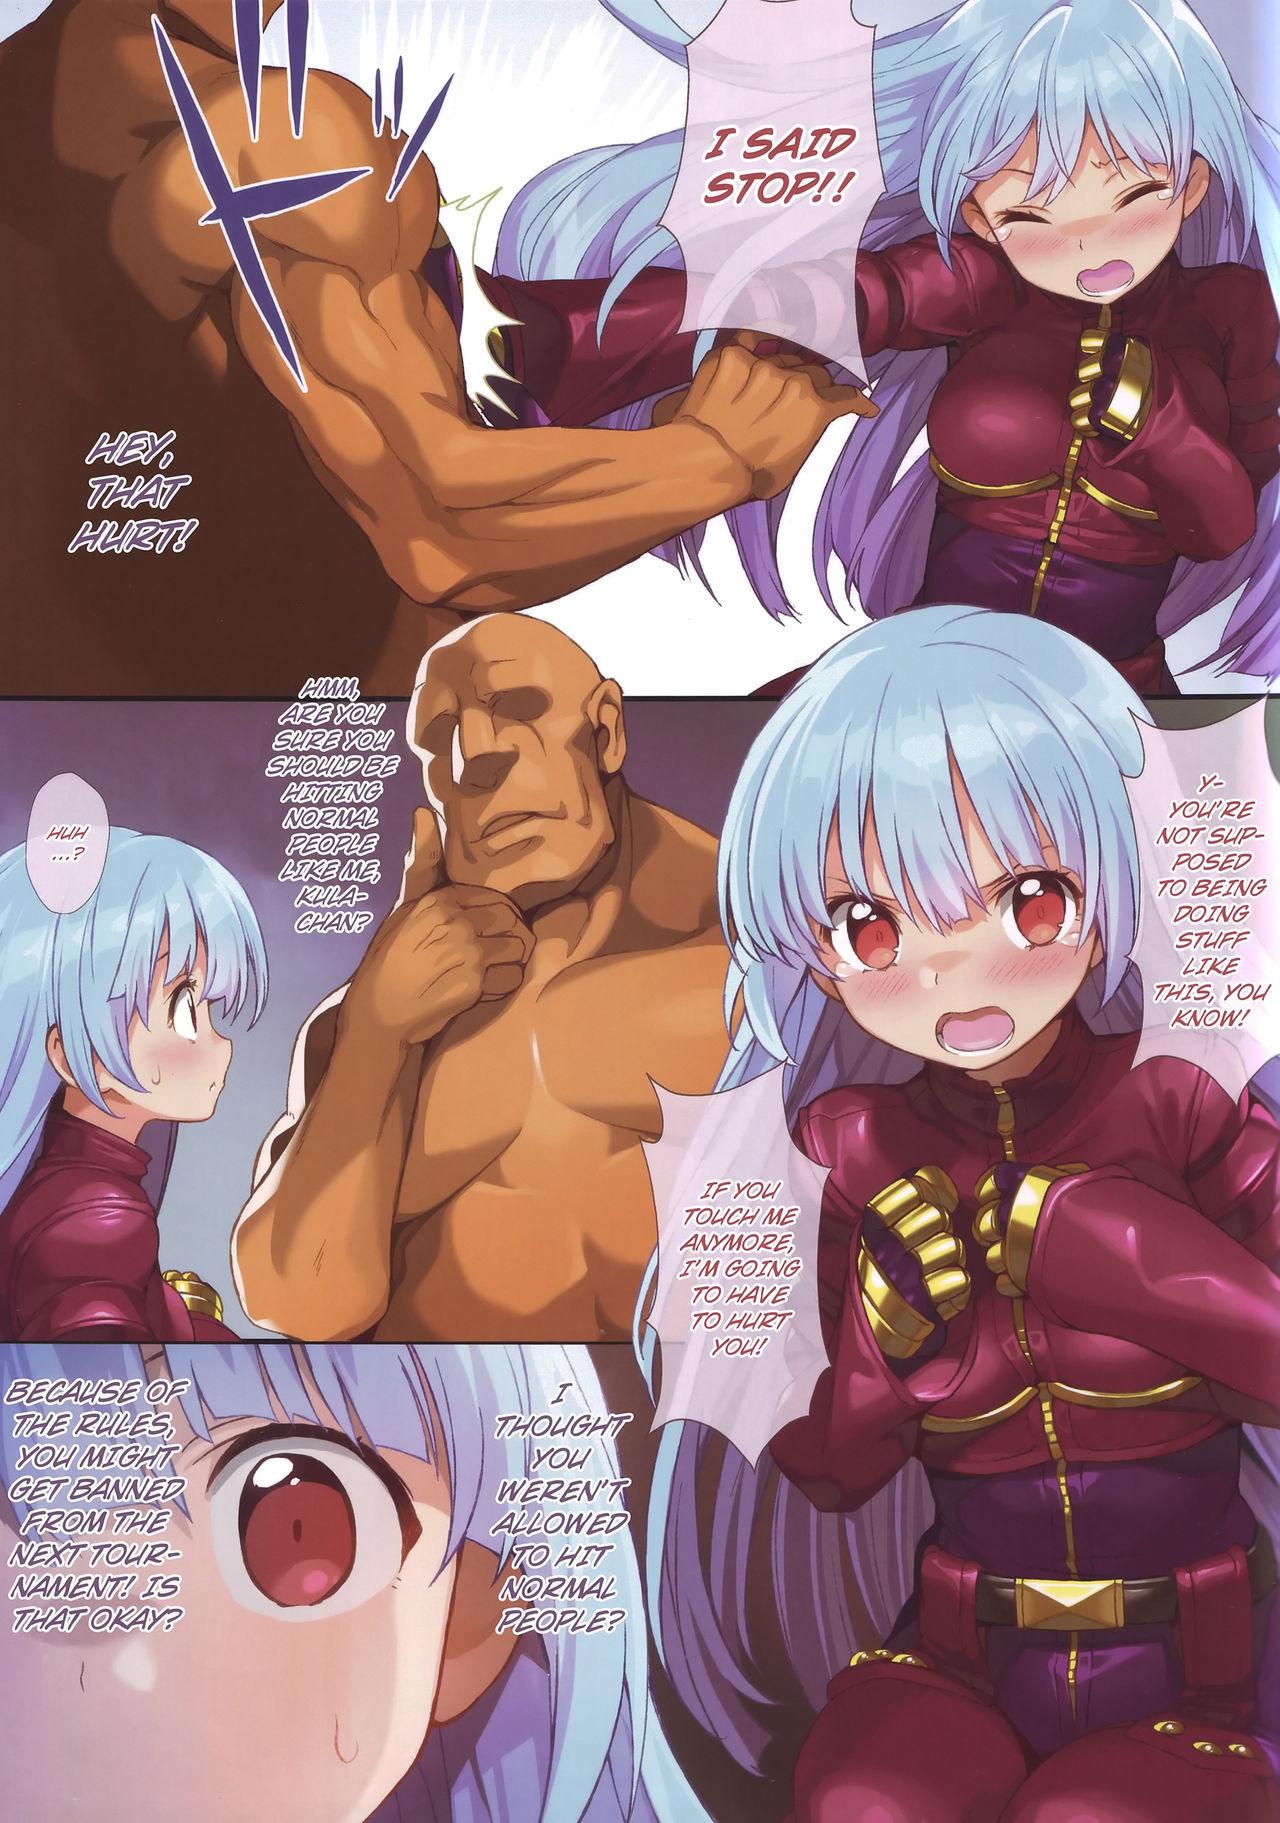 Freaky FREE CANDY + FREE PAPER - King of fighters Cougars - Page 4